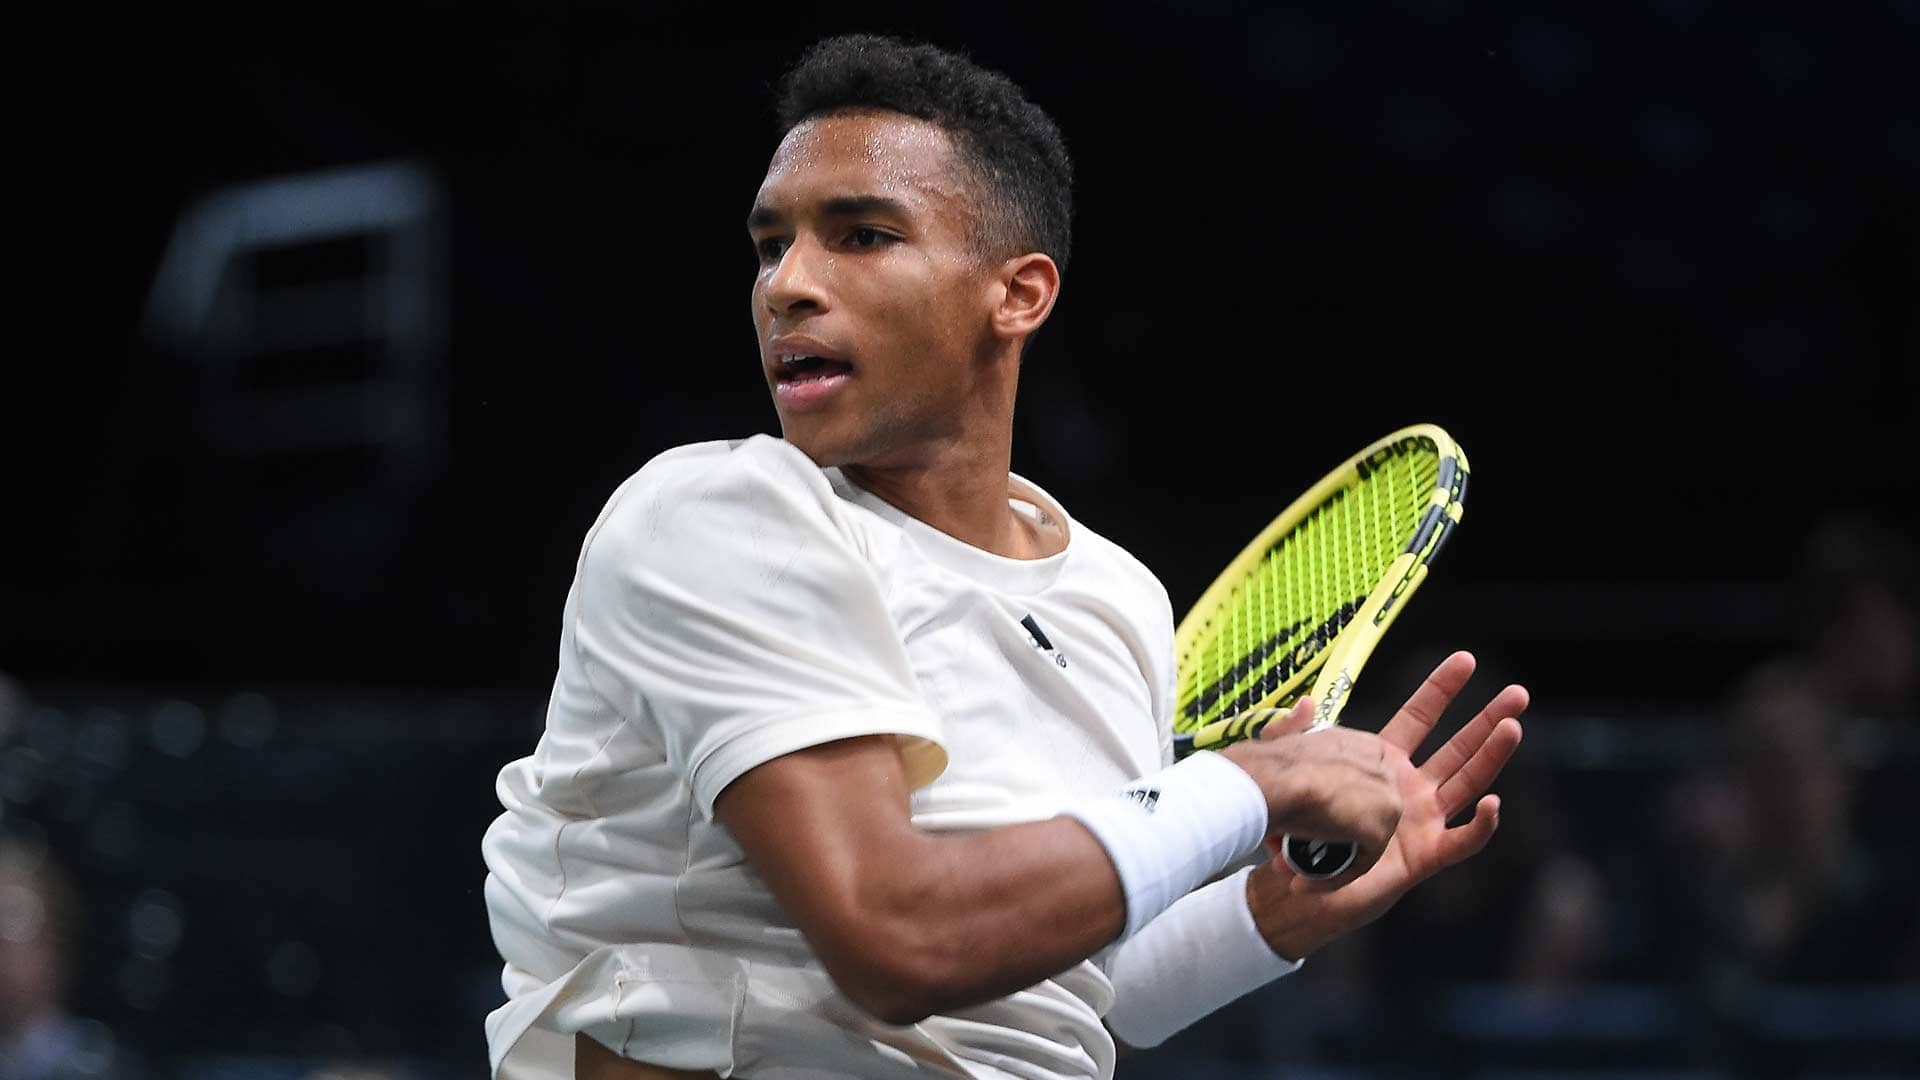 Felix Auger-Aliassime is No. 13 in the Pepperstone ATP Rankings.